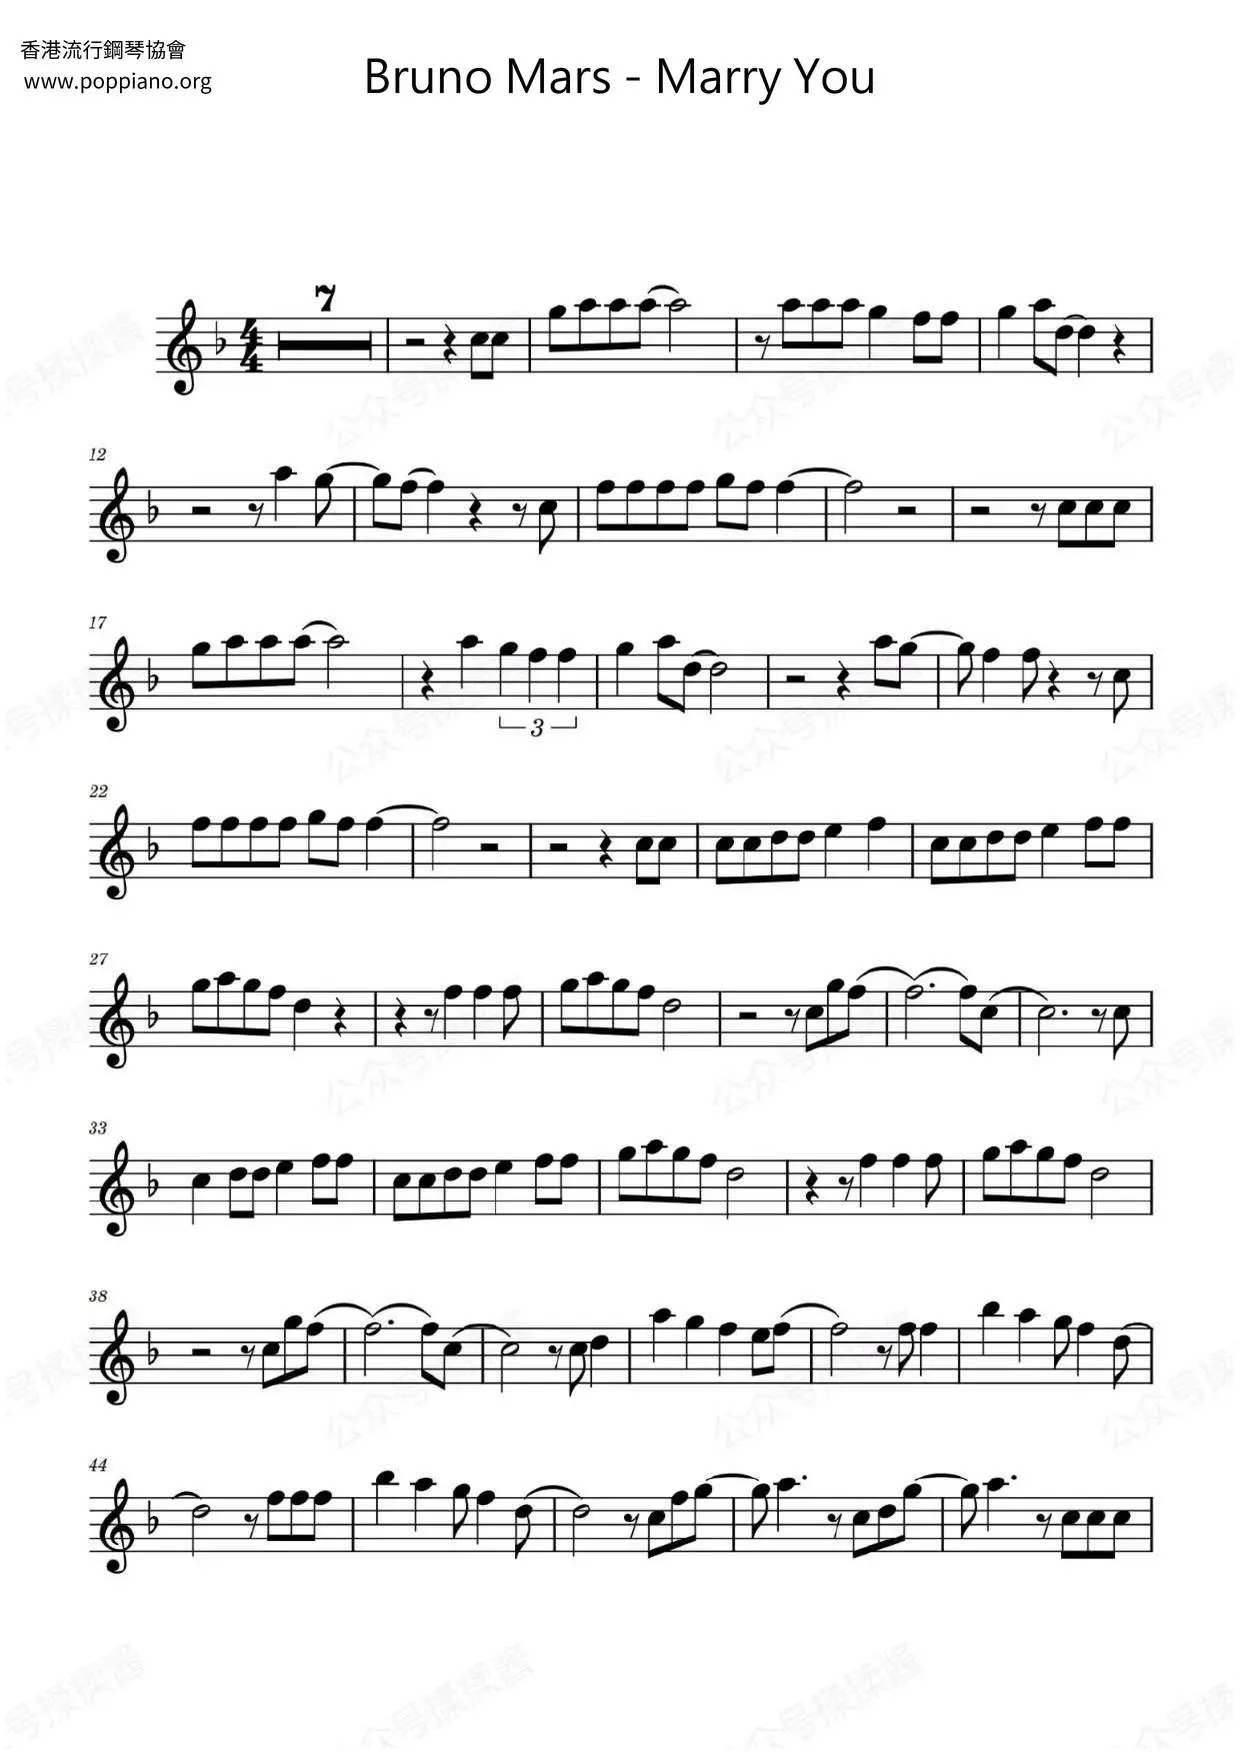 bruno mars marry you violin - What instruments are used in Marry You by Bruno Mars